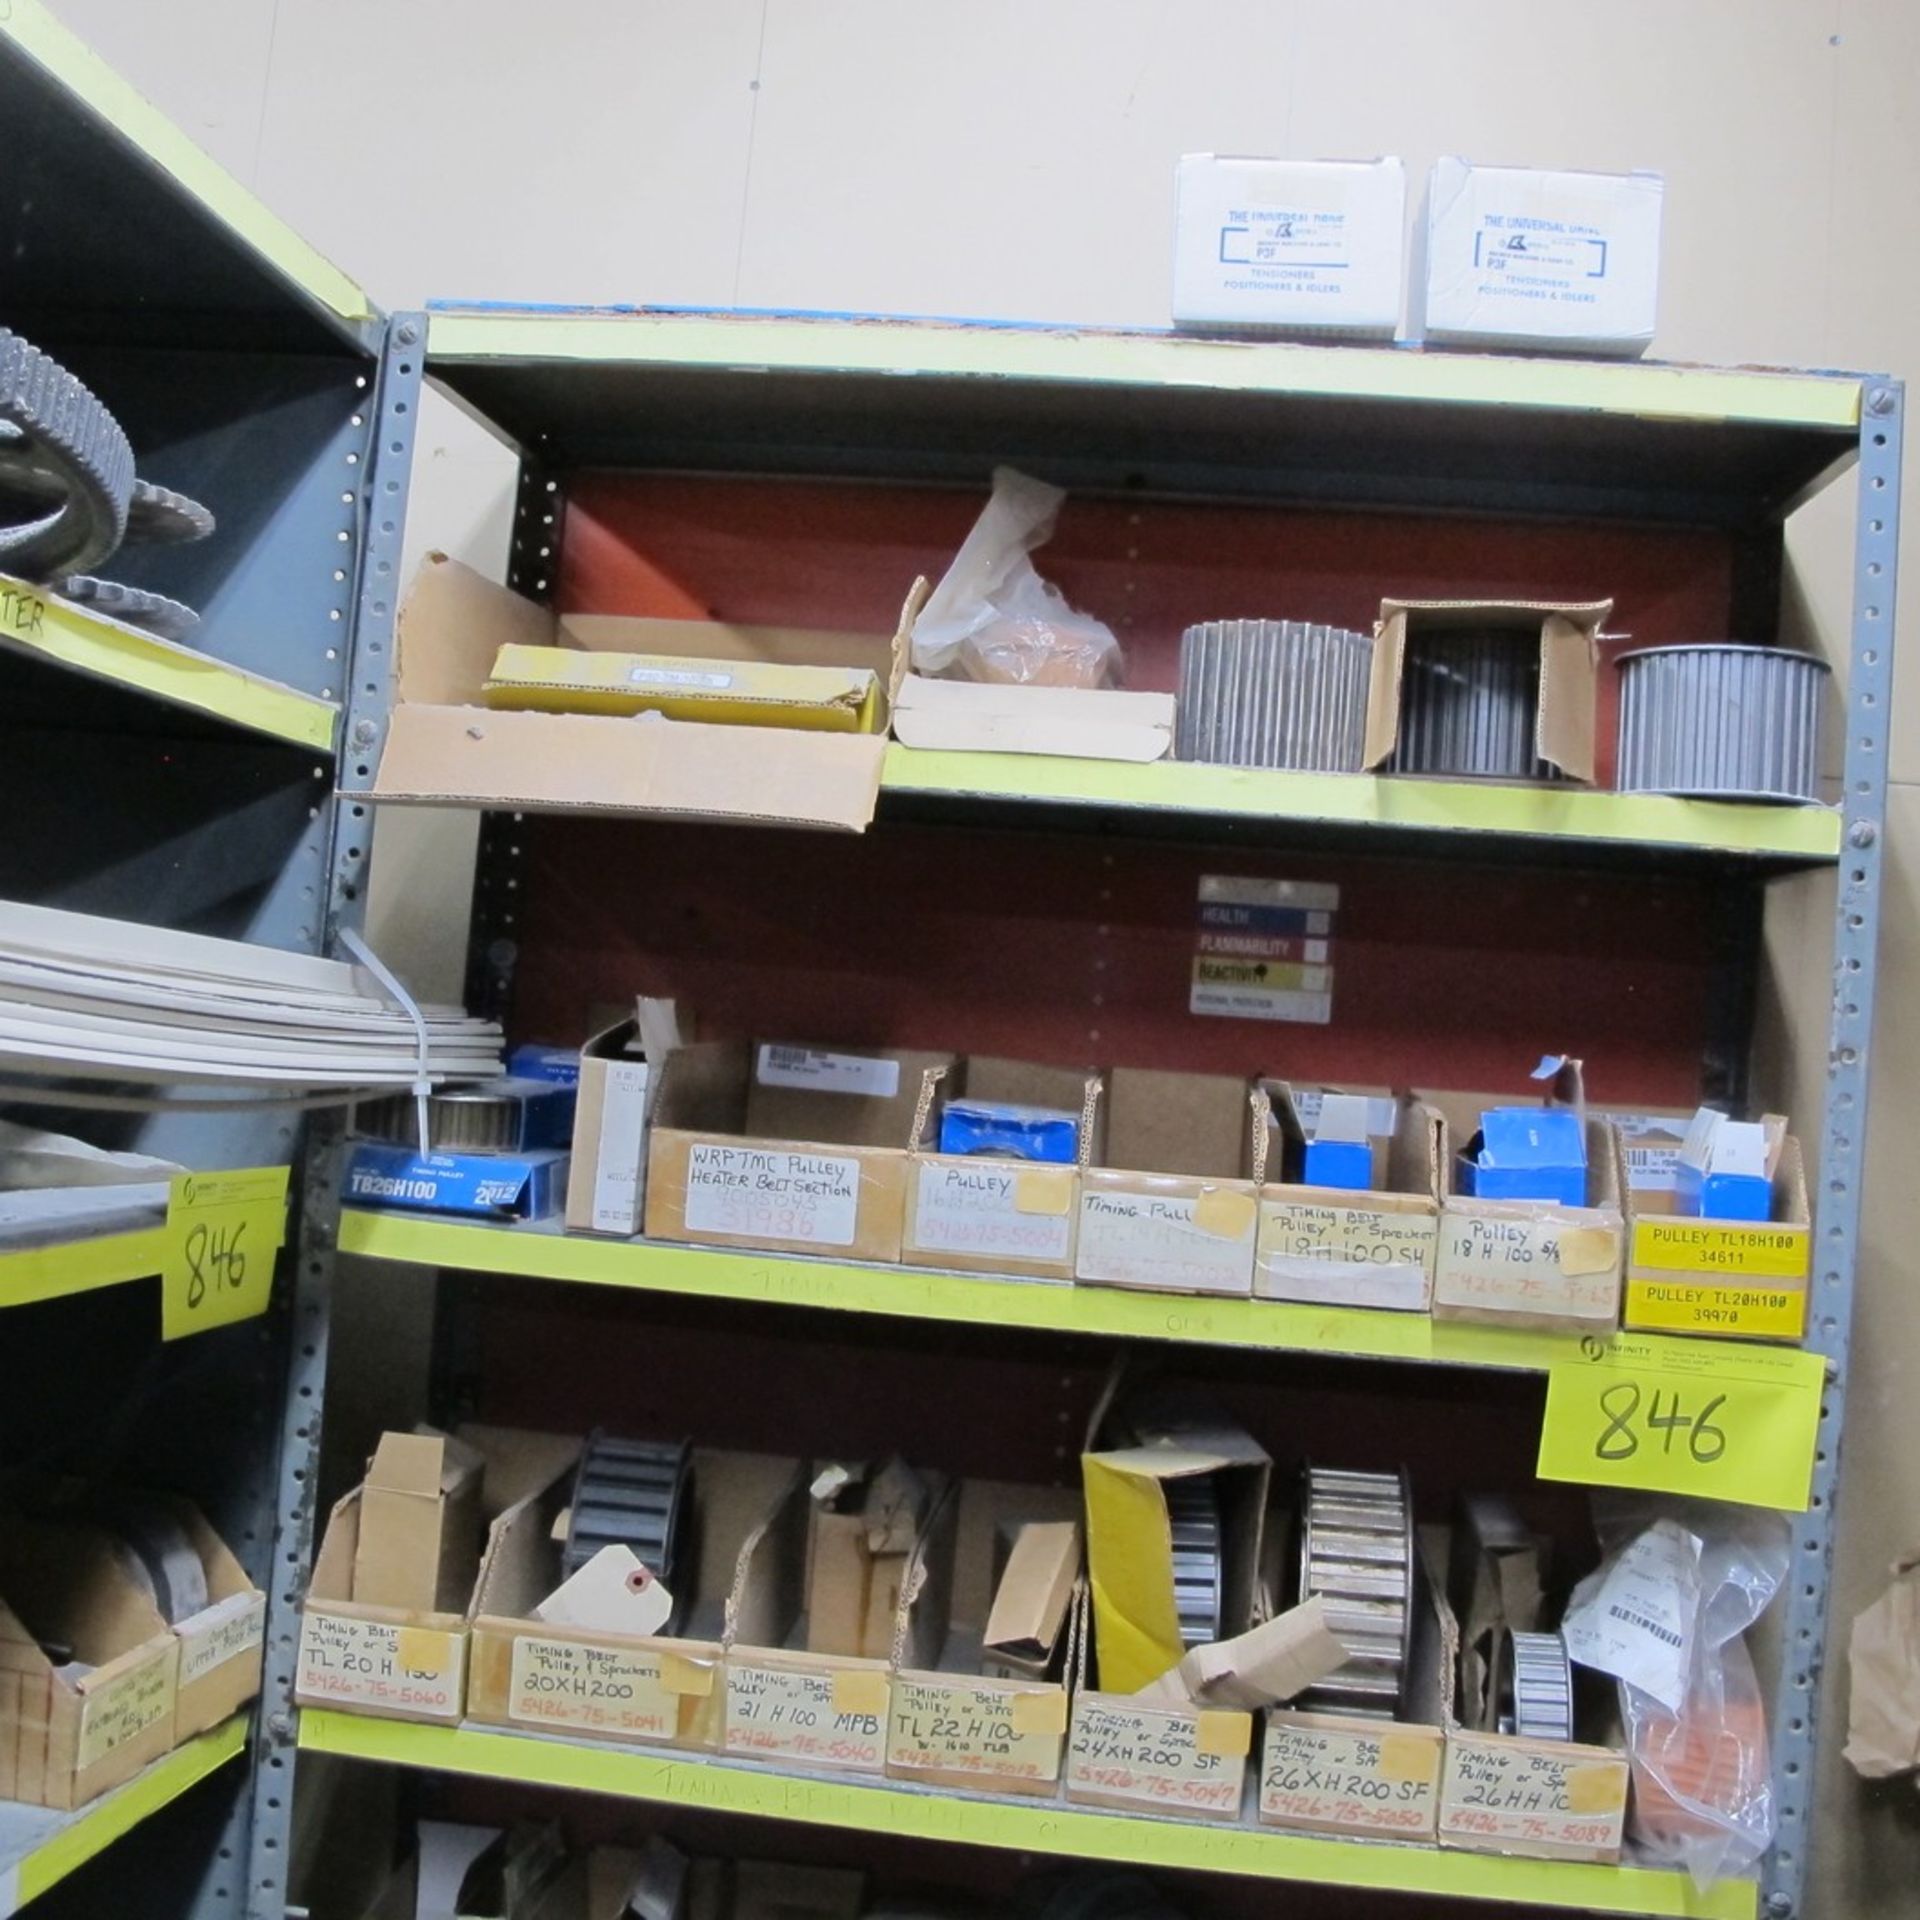 LOT OF ASST. PULLIES, TIMING BELTS, PRINTER PARTS, CLEANER, WRAPPER PARTS W/ (4) SECTIONS OF RACKING - Image 10 of 12